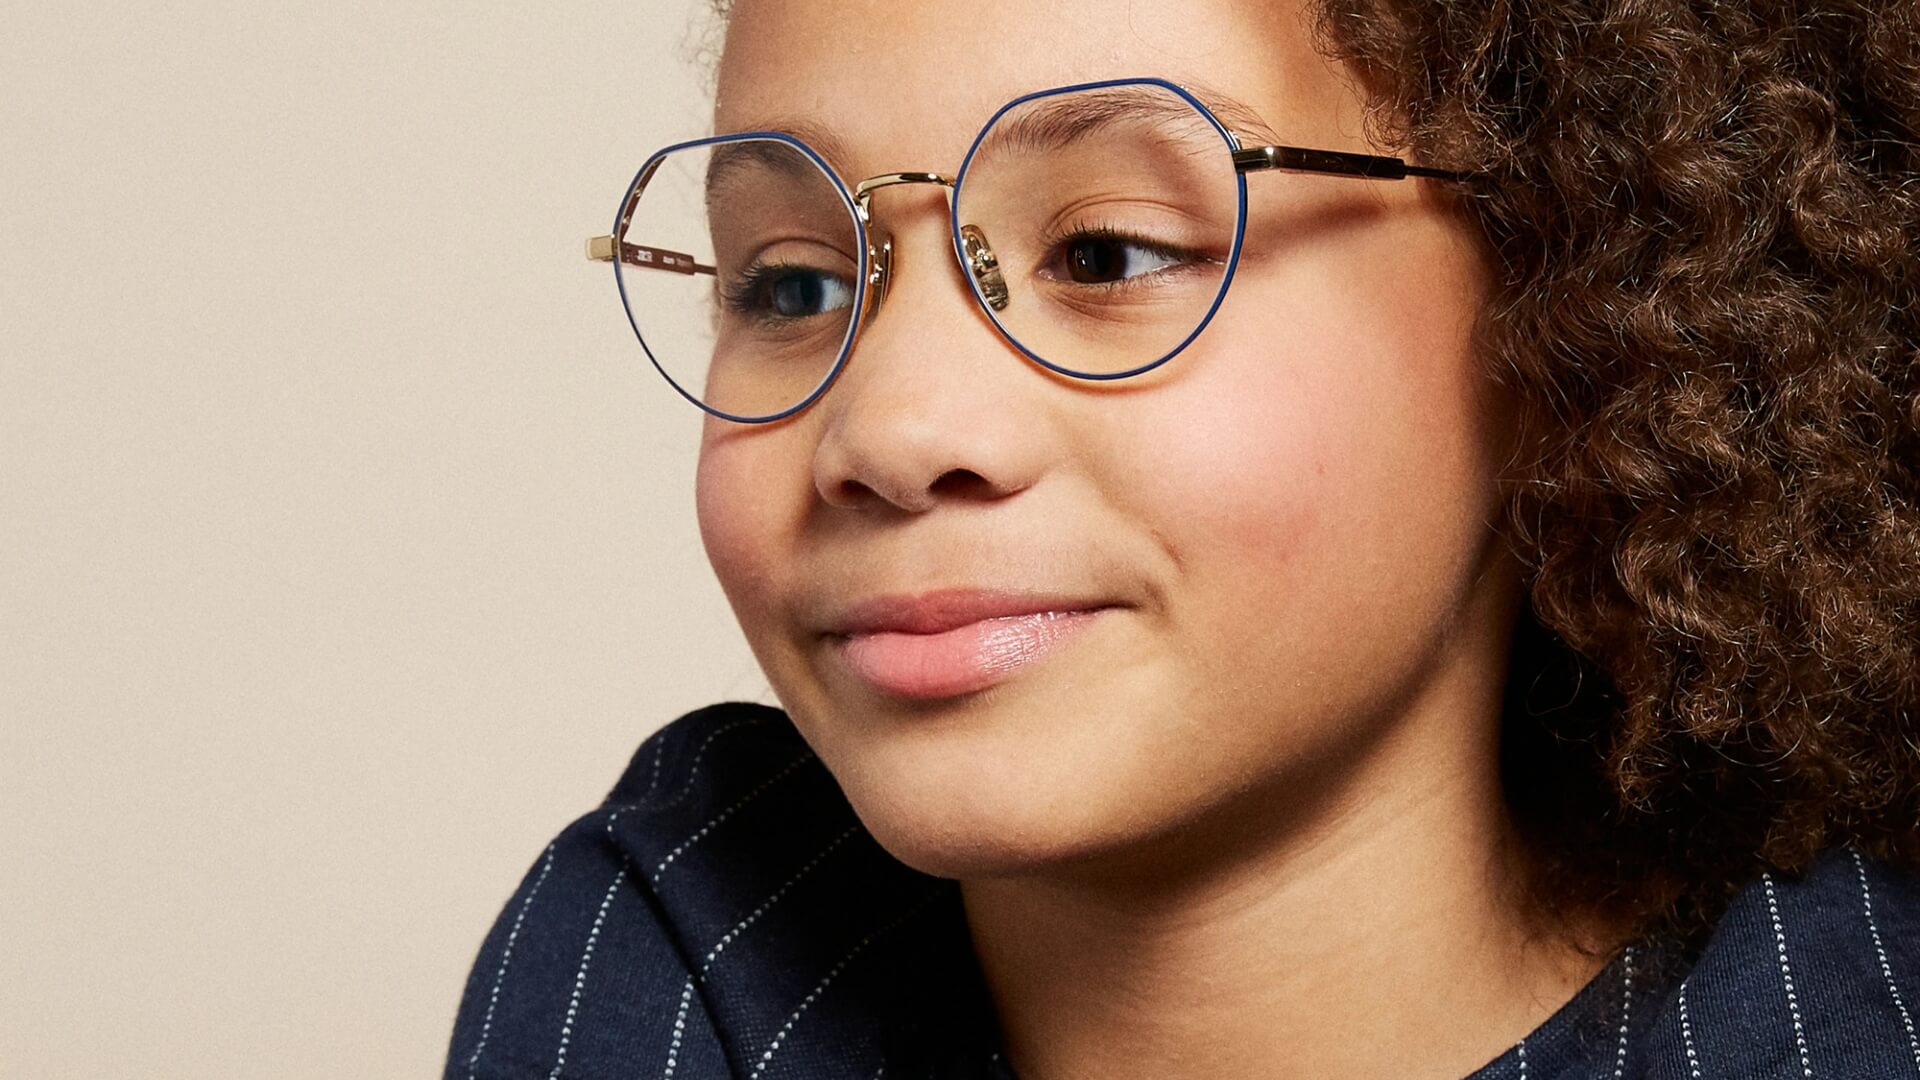 Girl with glasses | Code